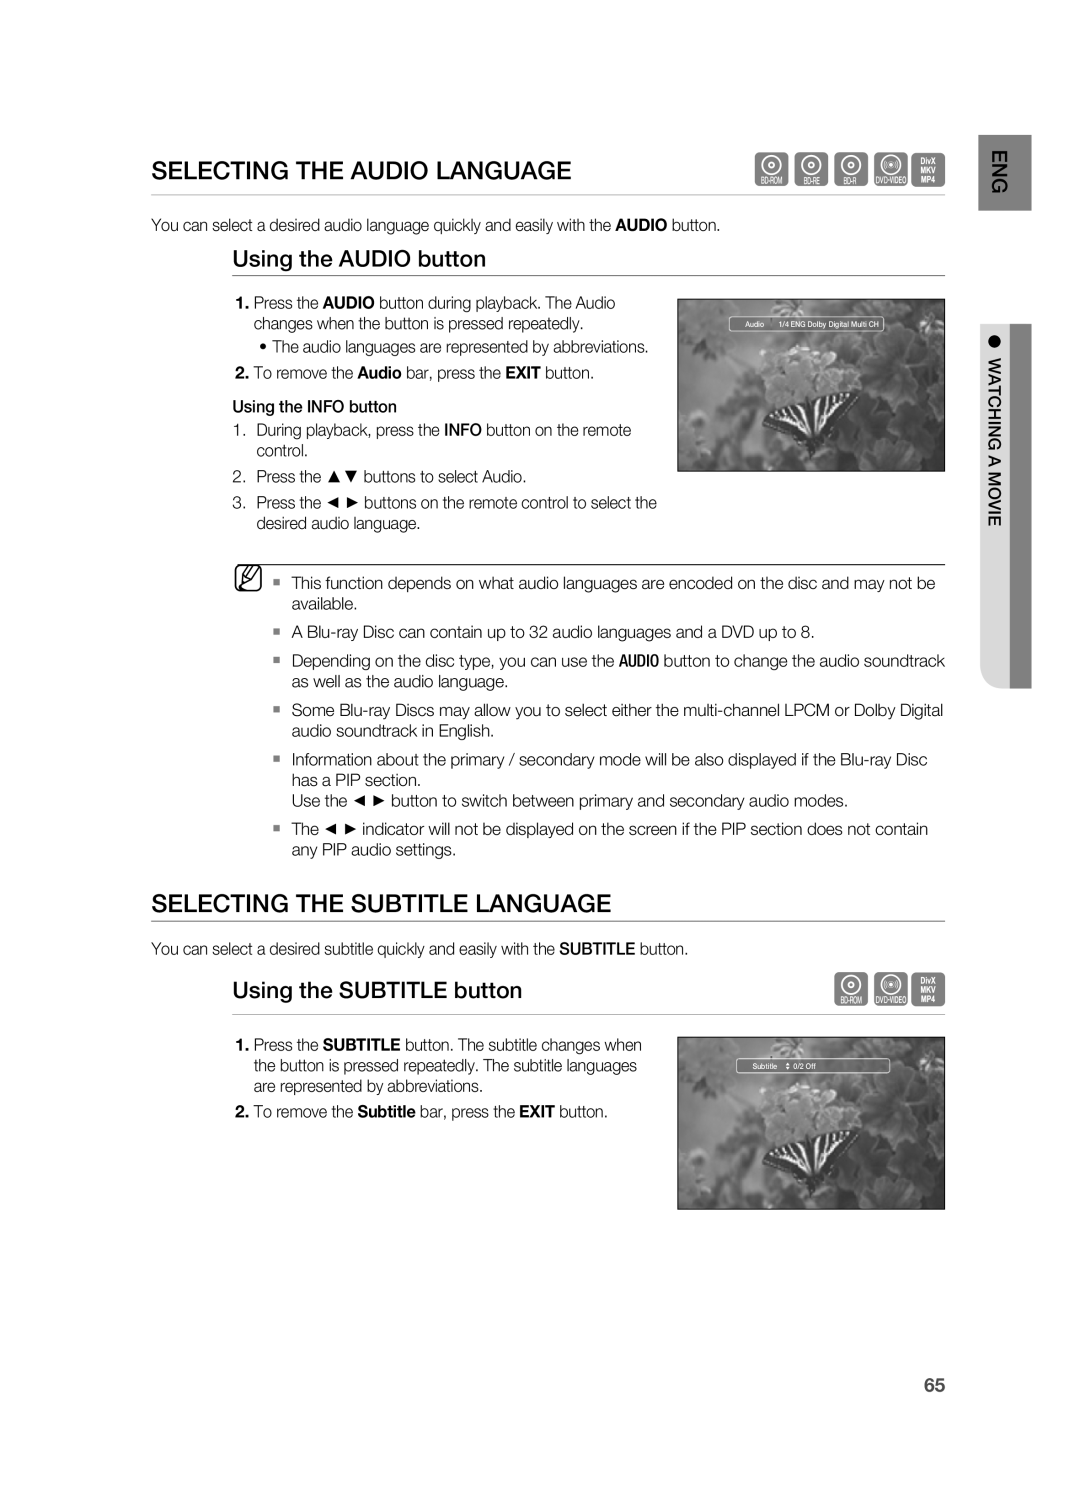 Samsung HT-BD3252 user manual hgfZ, Selecting The Audio Language, Selecting The Subtitle Language, Using the AUDIO button 